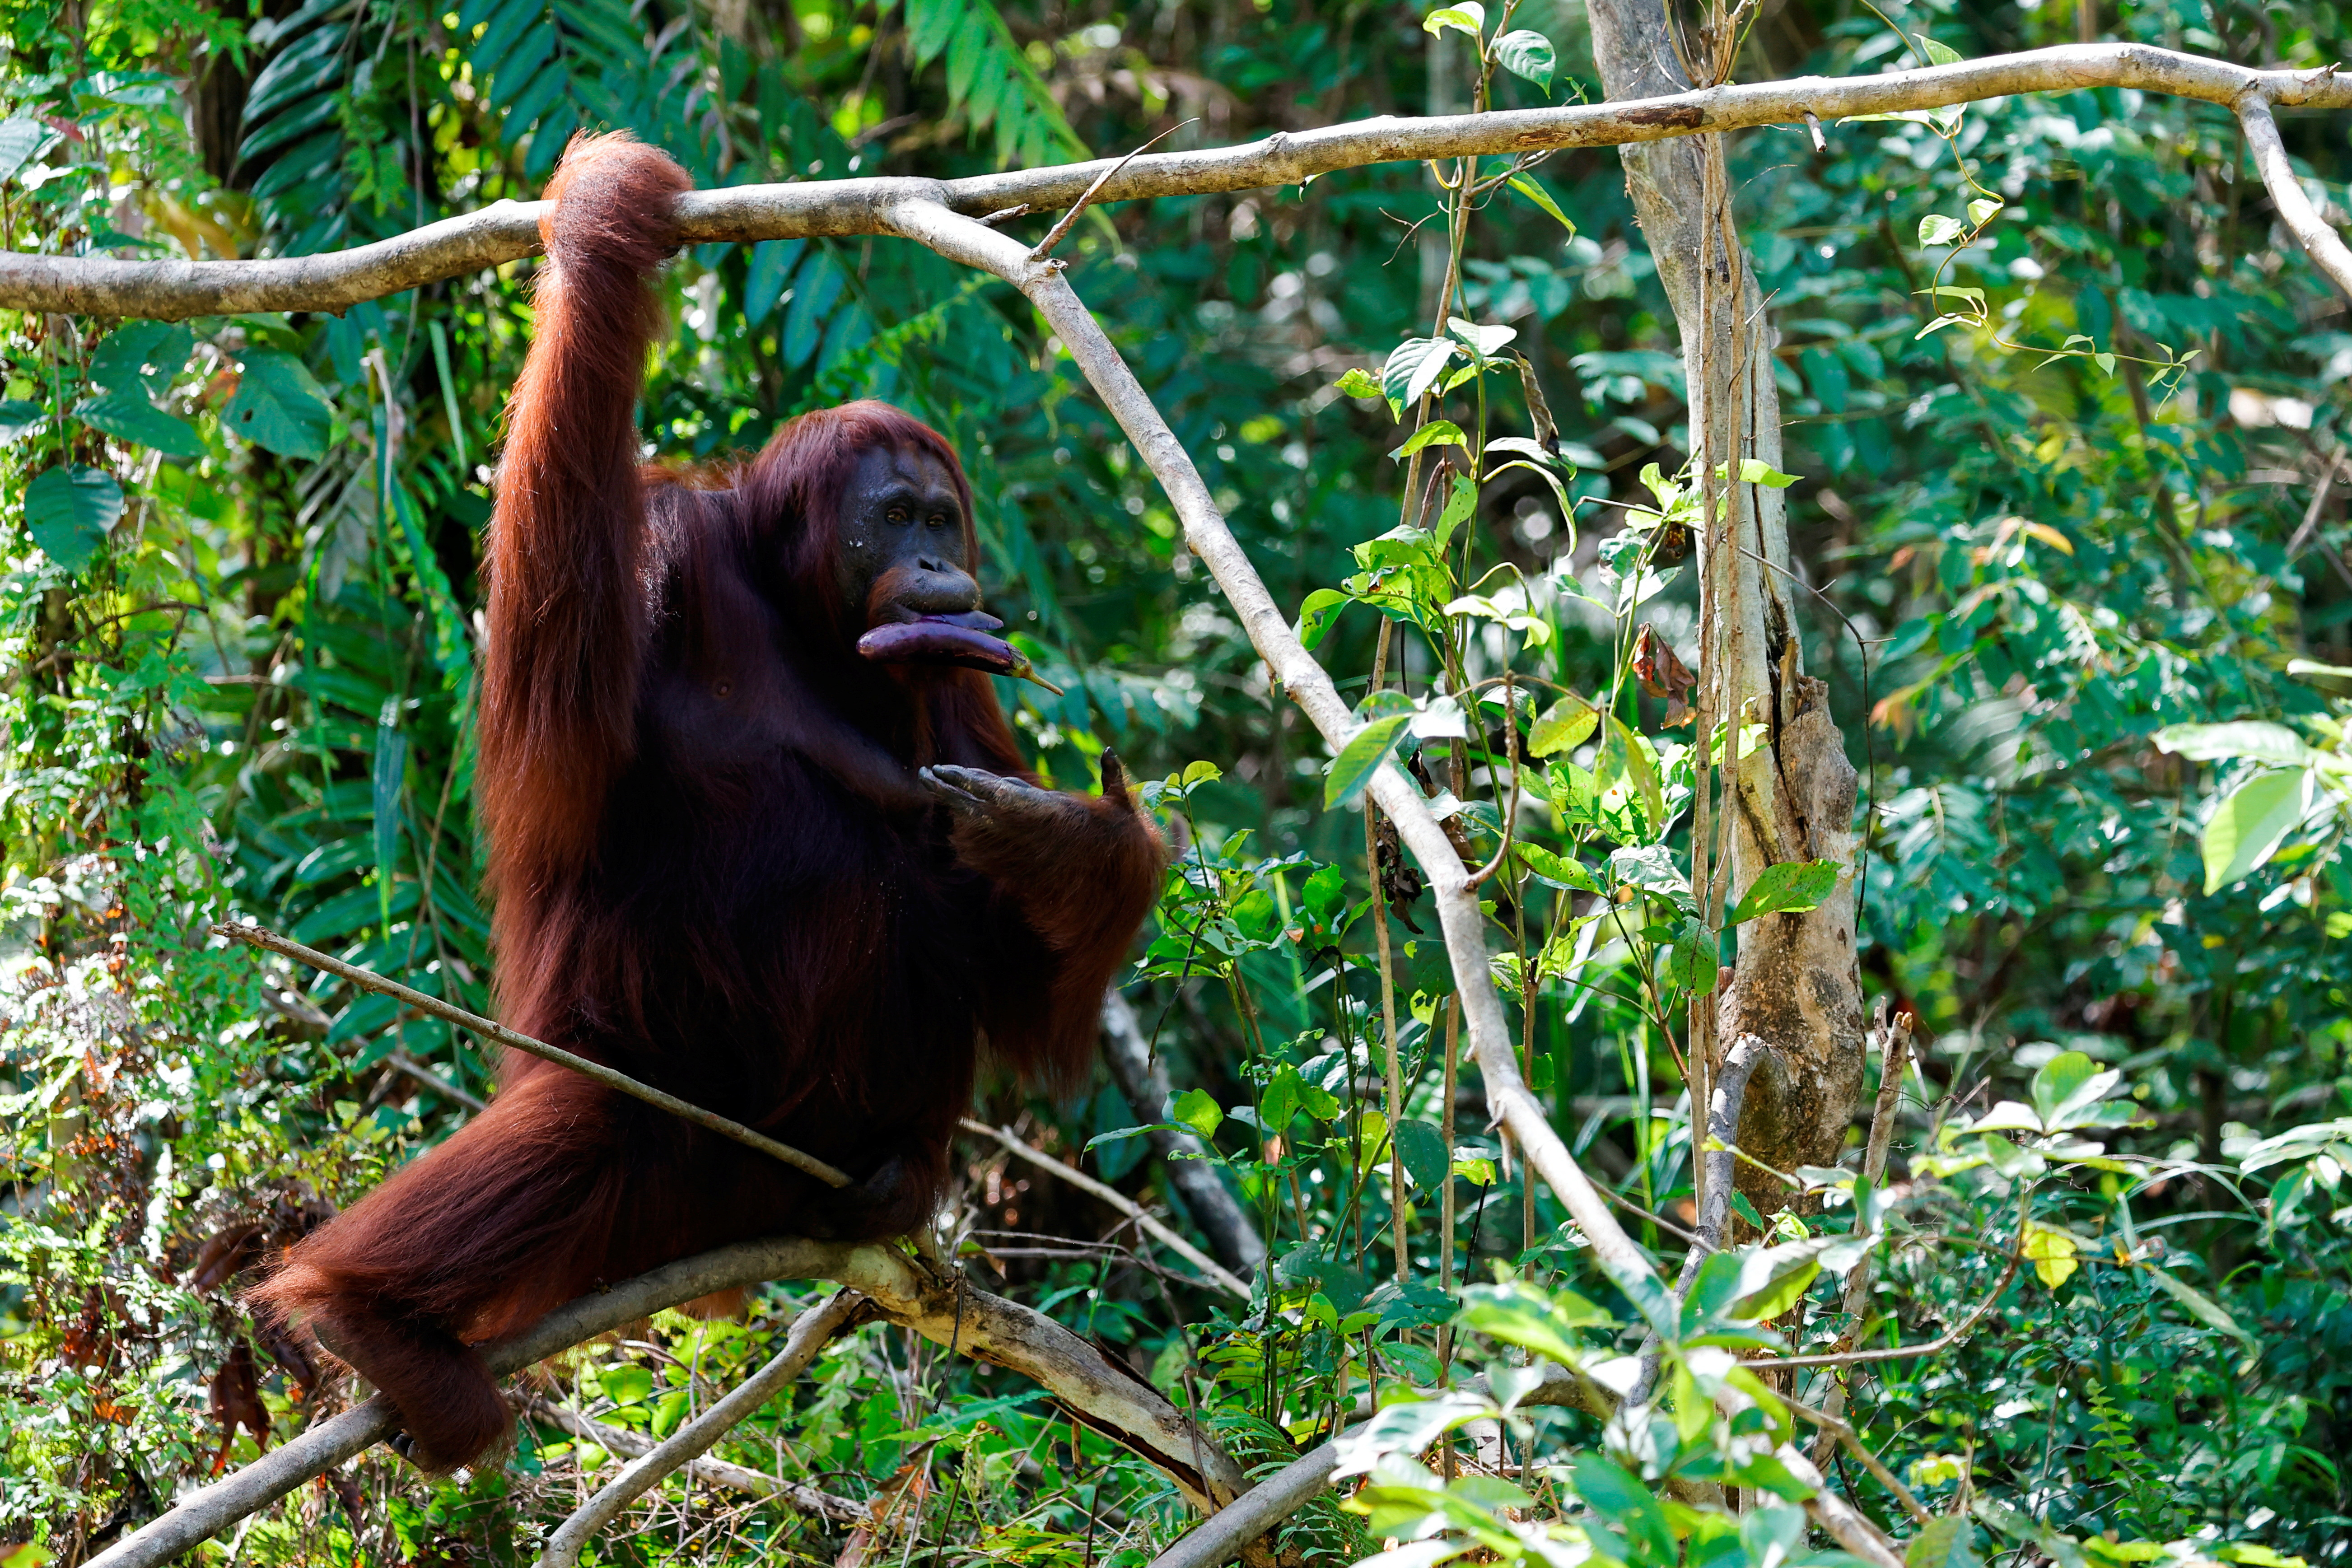 Endangered Orangutan population and habitat concerns loom a year into Indonesia's new capital construction